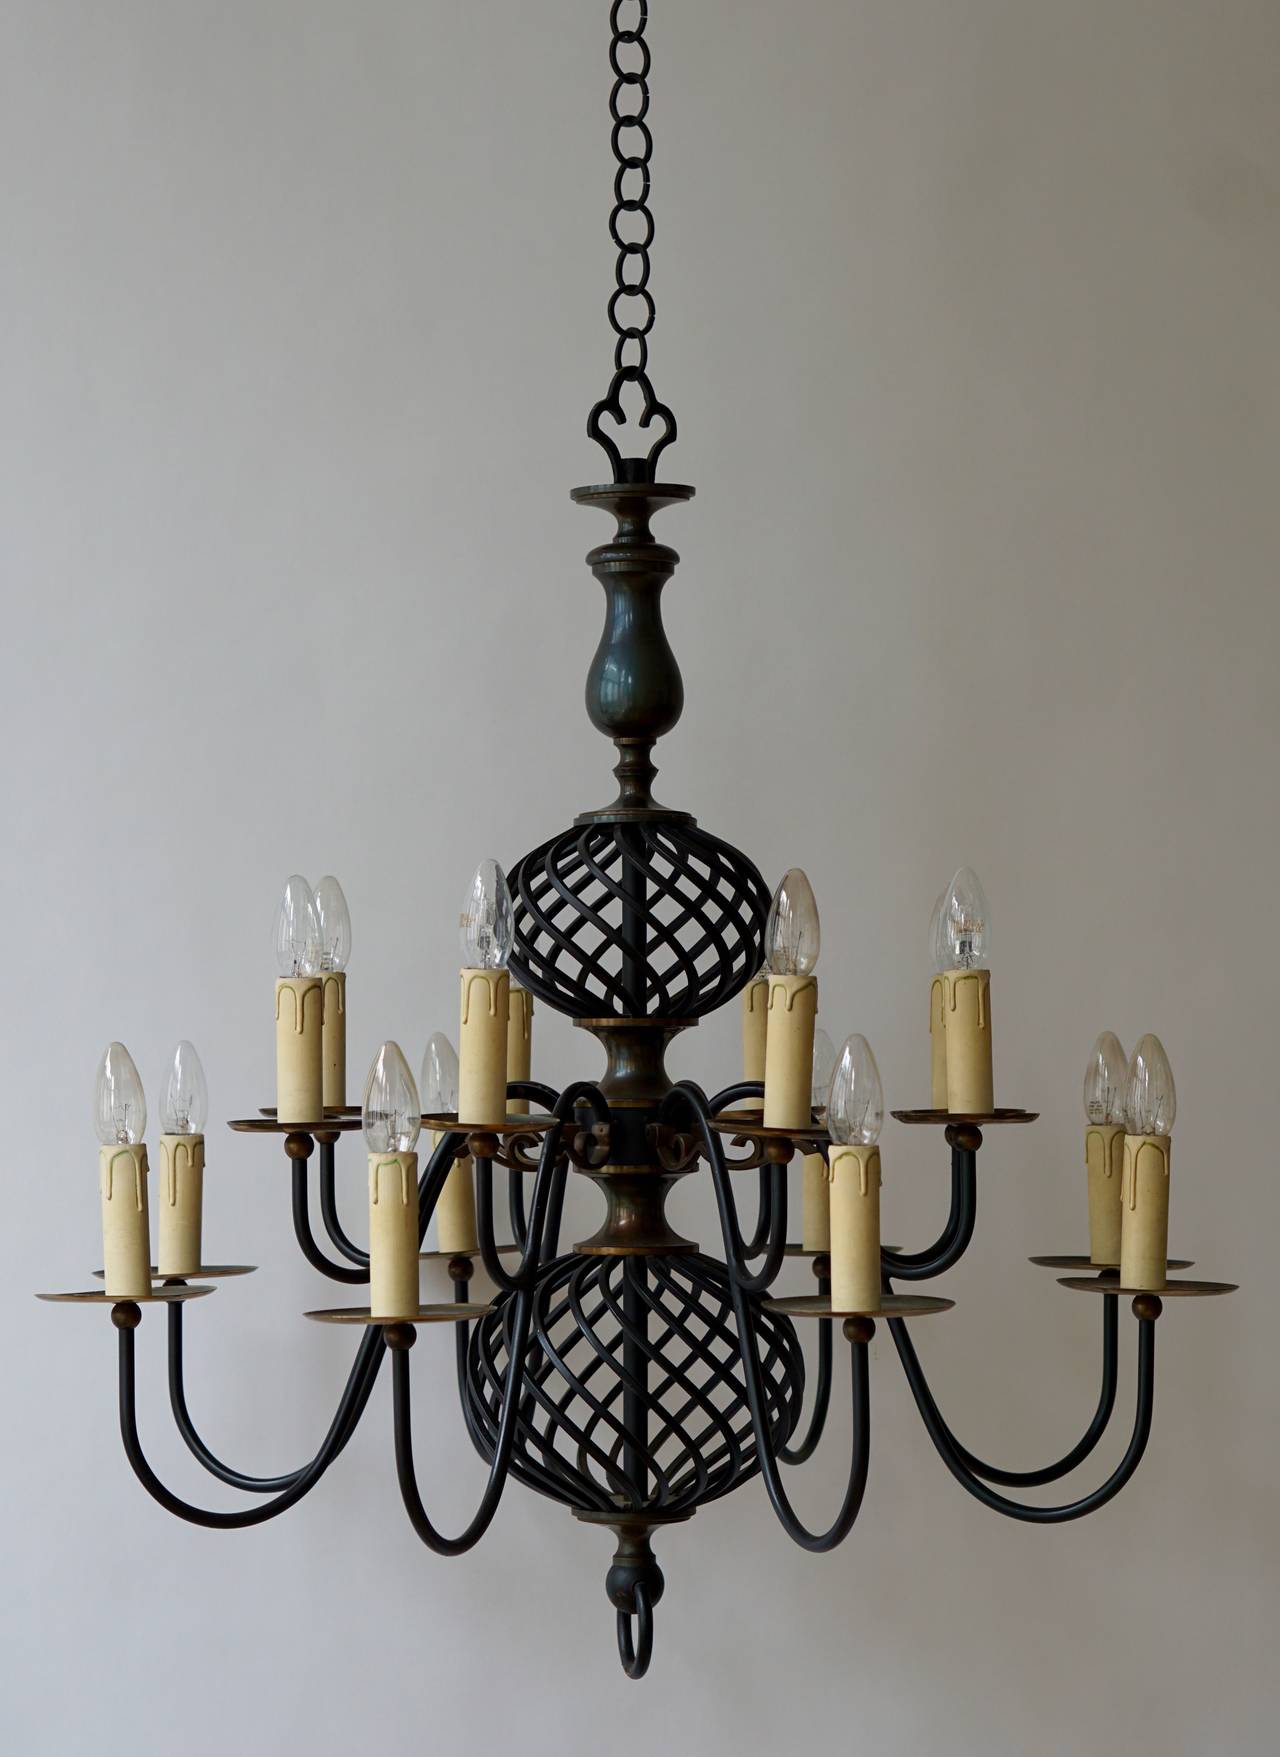 Original Midcentury chandelier from France, 1950s.
Body of solid wrought iron.

Diameter 33